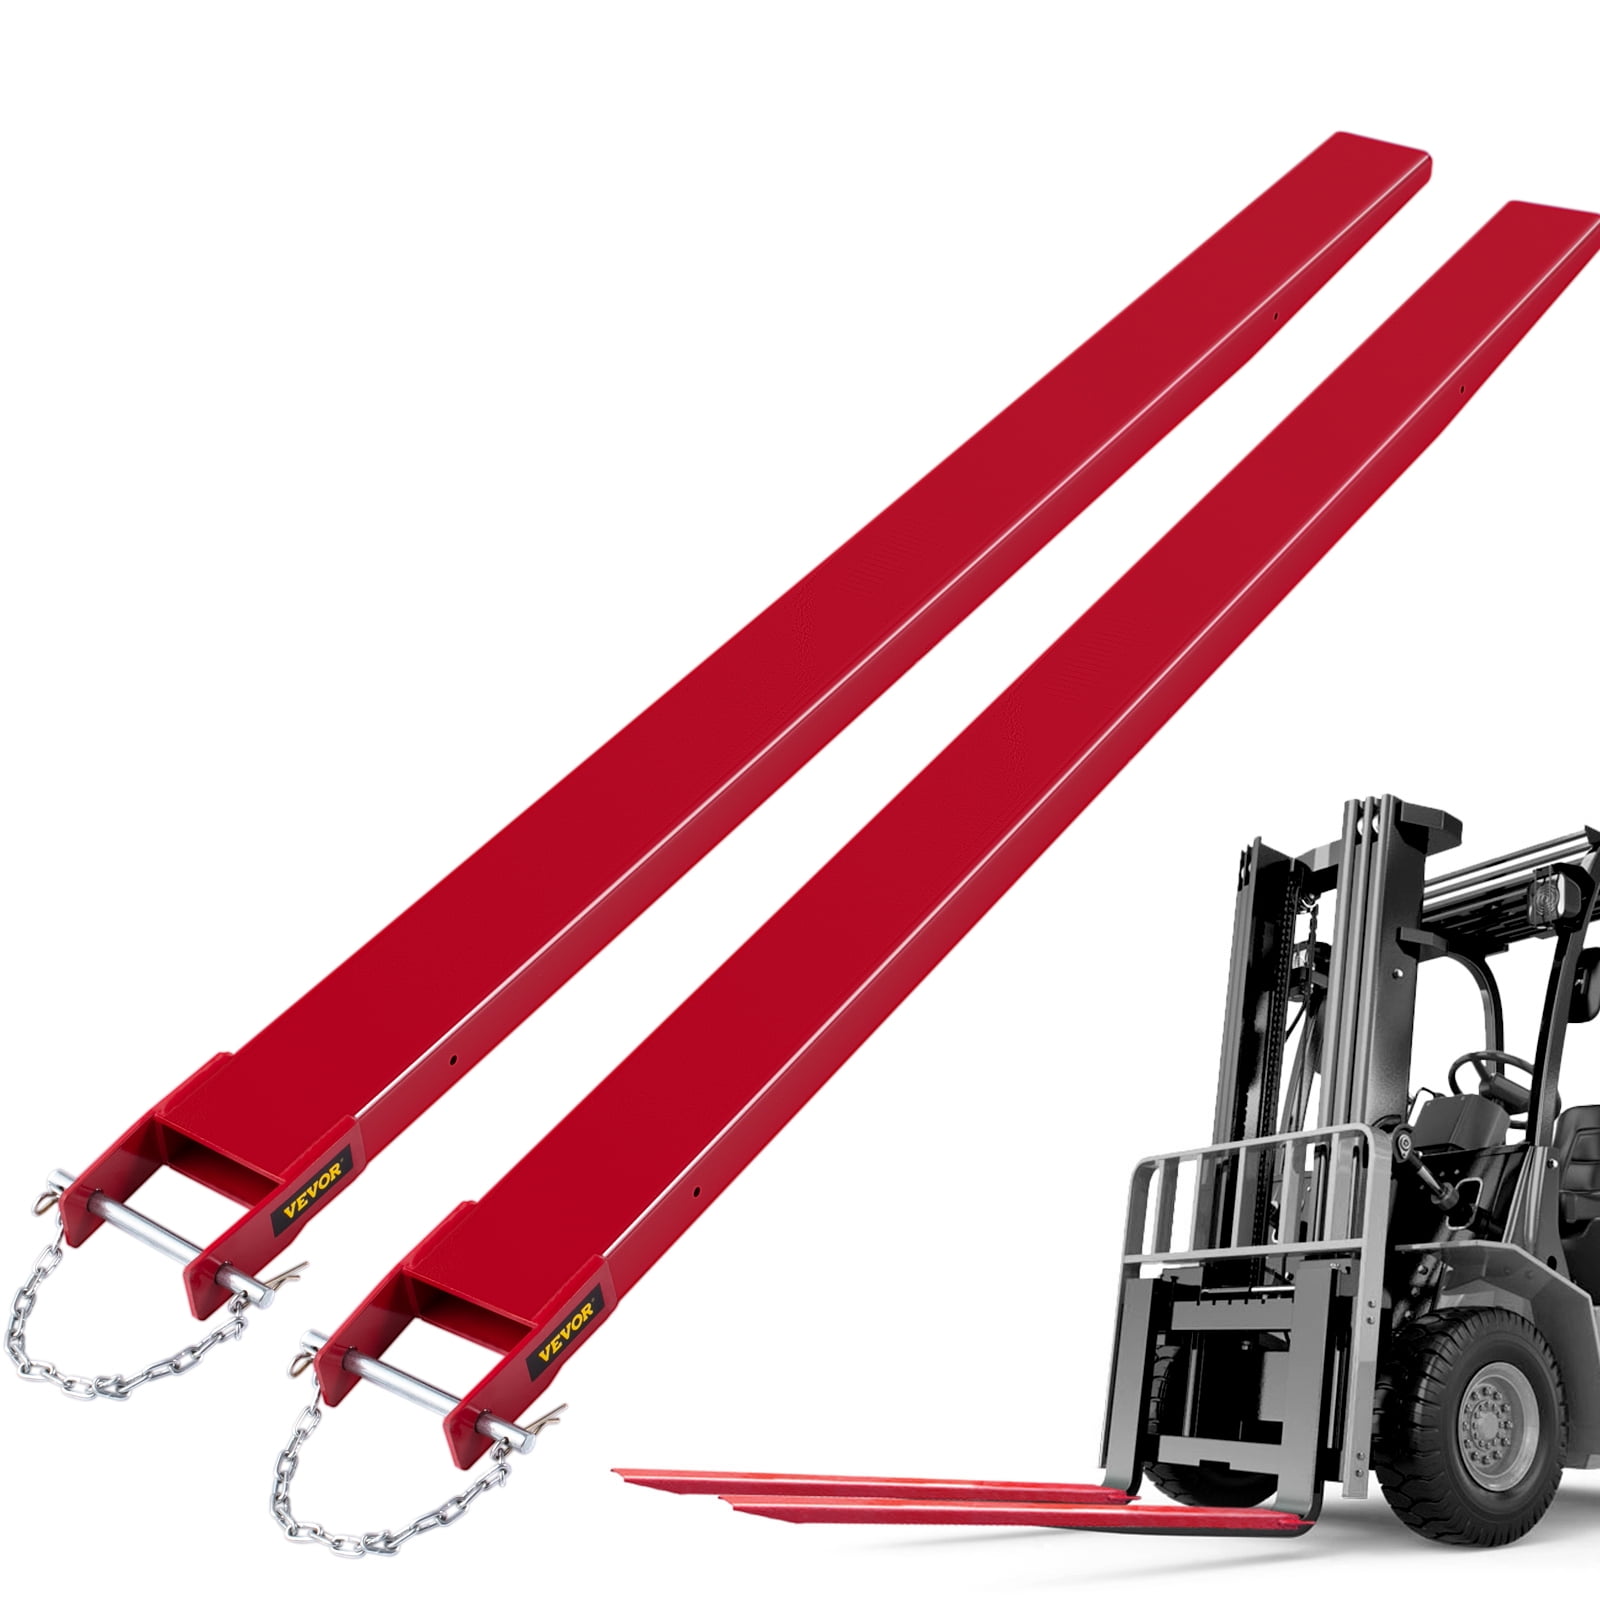 NEW Forklift Forks Class 2 72" Long 8000 Capacity Free Shipping 